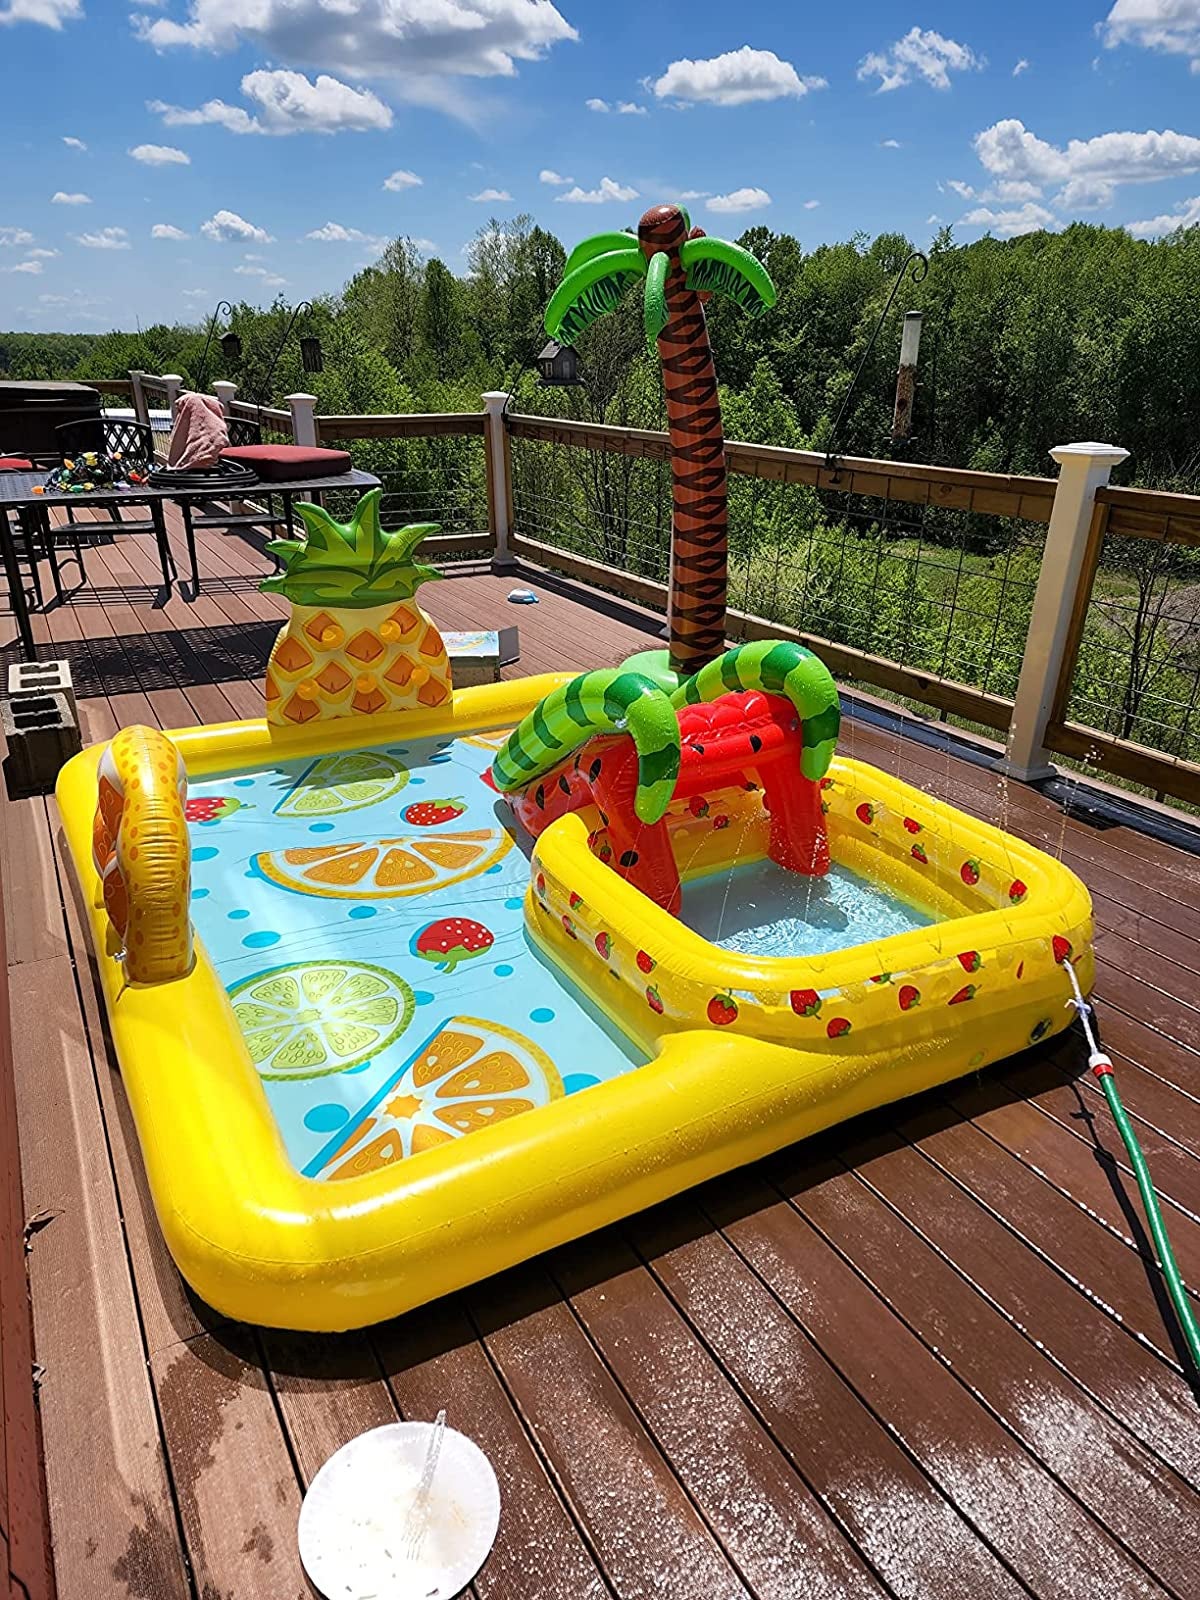 The pool center inflated on a reviewer's deck filled with water